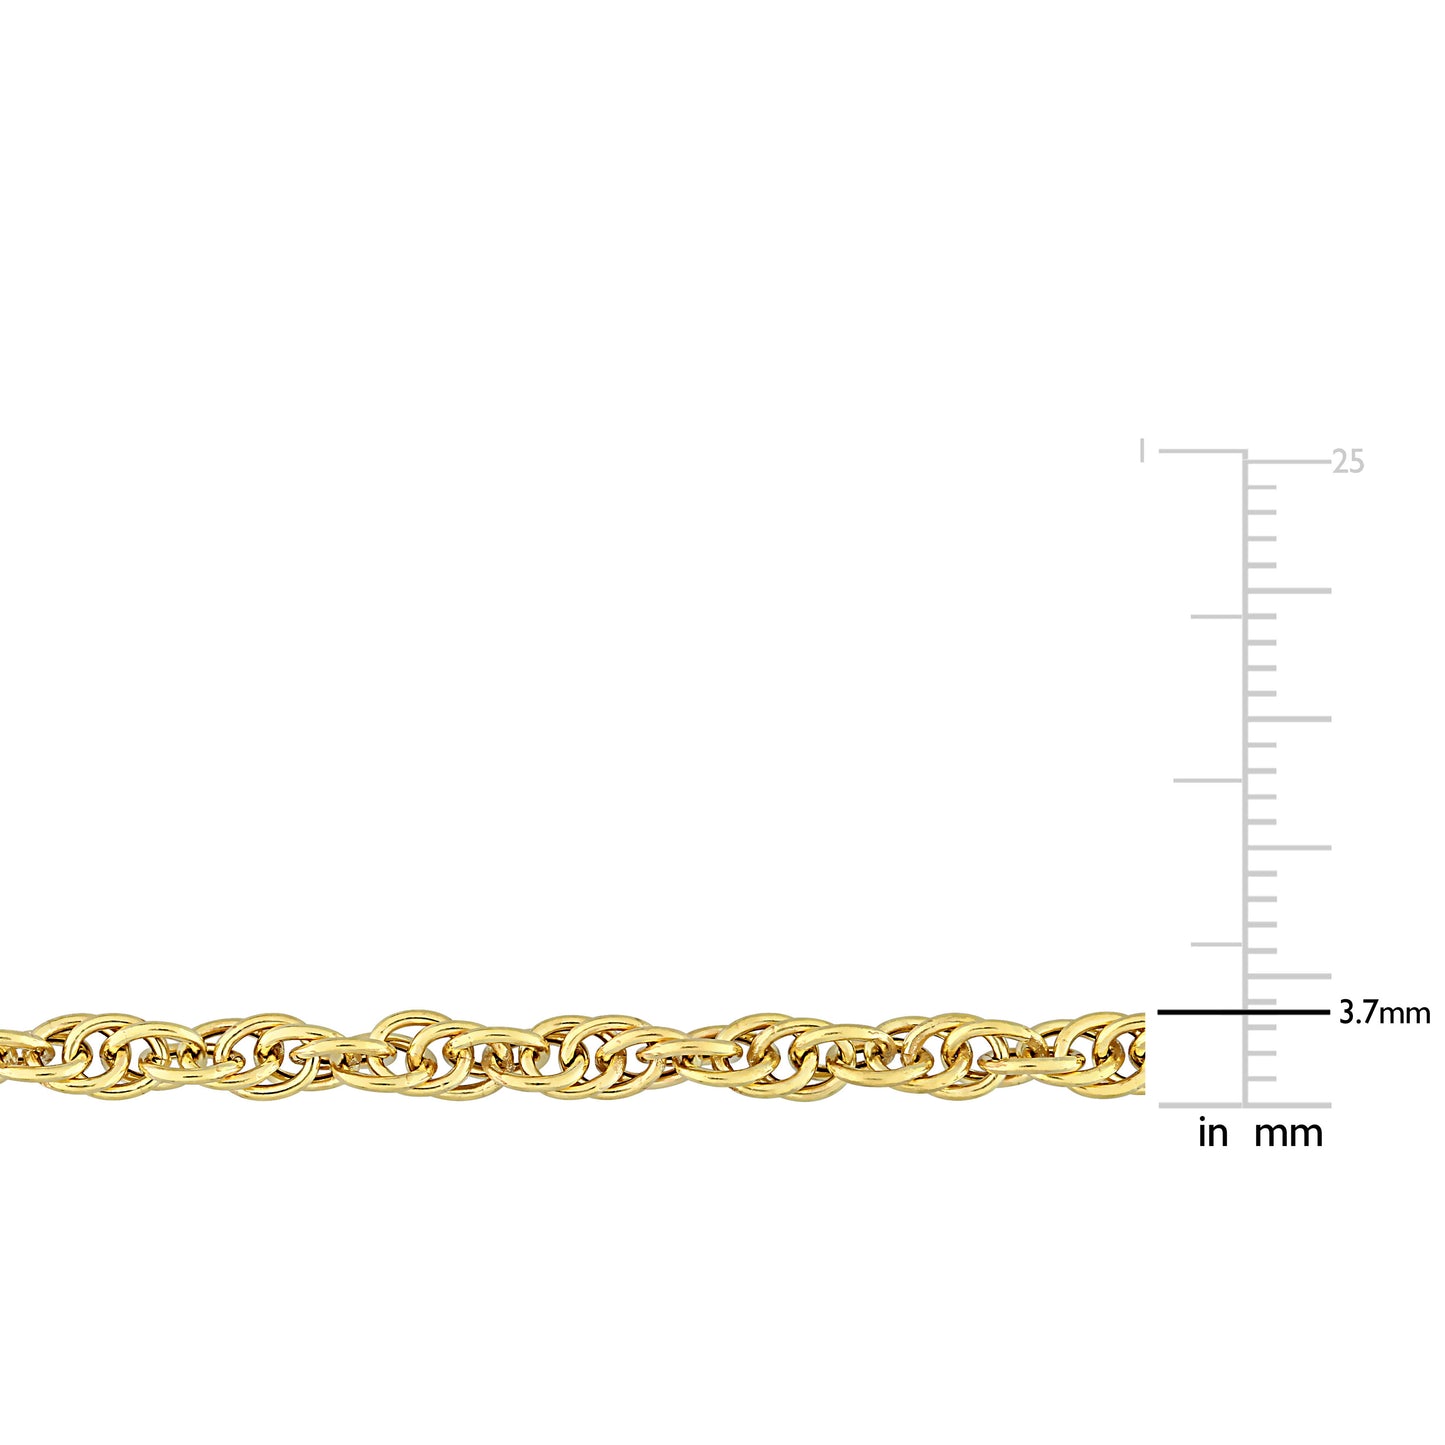 18k Yellow Gold Plated Singapore Chain Bracelet in 3.7mm